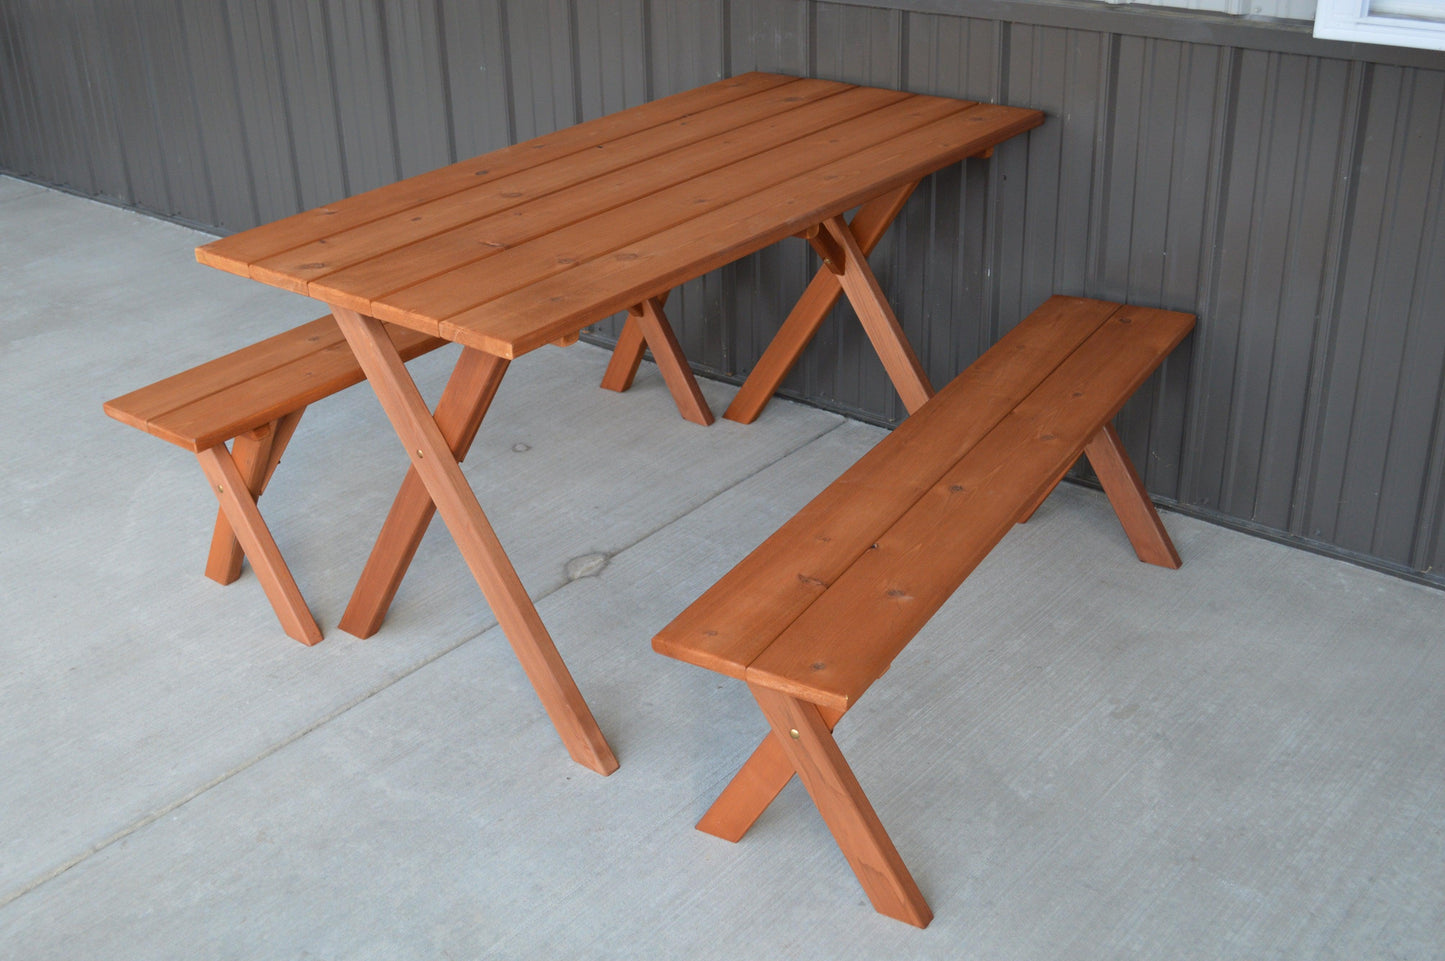 A&L FURNITURE CO. Western Red Cedar 5' Cedar Economy Table w/ 2 benches (THIS ITEM HAS BEEN DISCONTINUED) - LEAD TIME TO SHIP 2 WEEKS